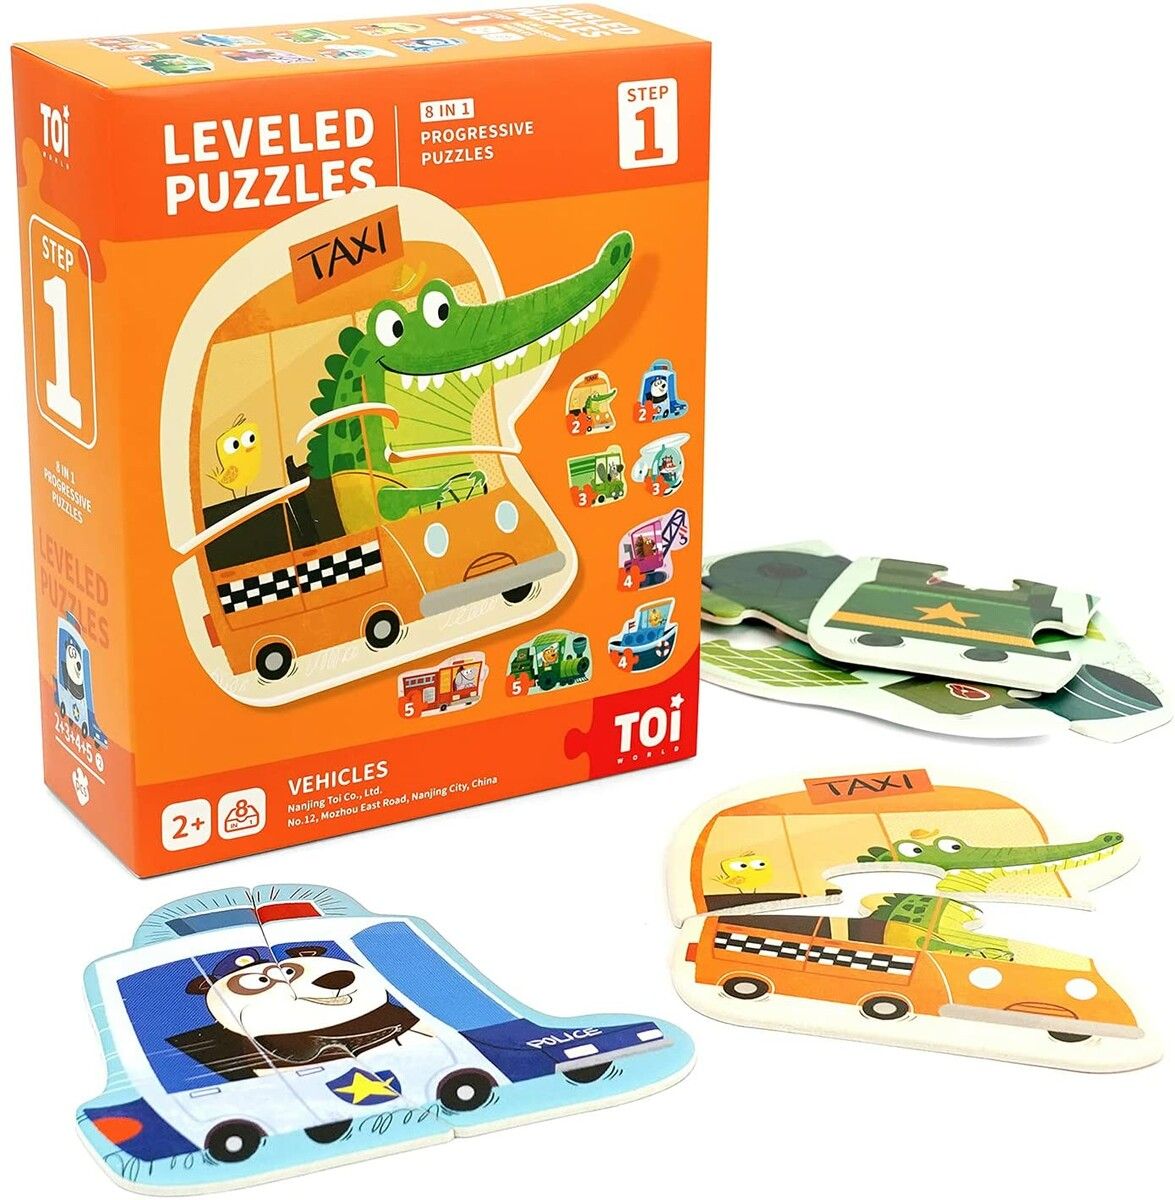 Kids Puzzles Toddlers Leveled Puzzles for Kids Age 3 Up,Toddlers Preschool Learning Jigsaw Puzzles,Large Piece Animal Puzzles for Toddlers Educational Toys, Cognitive Story Step 1